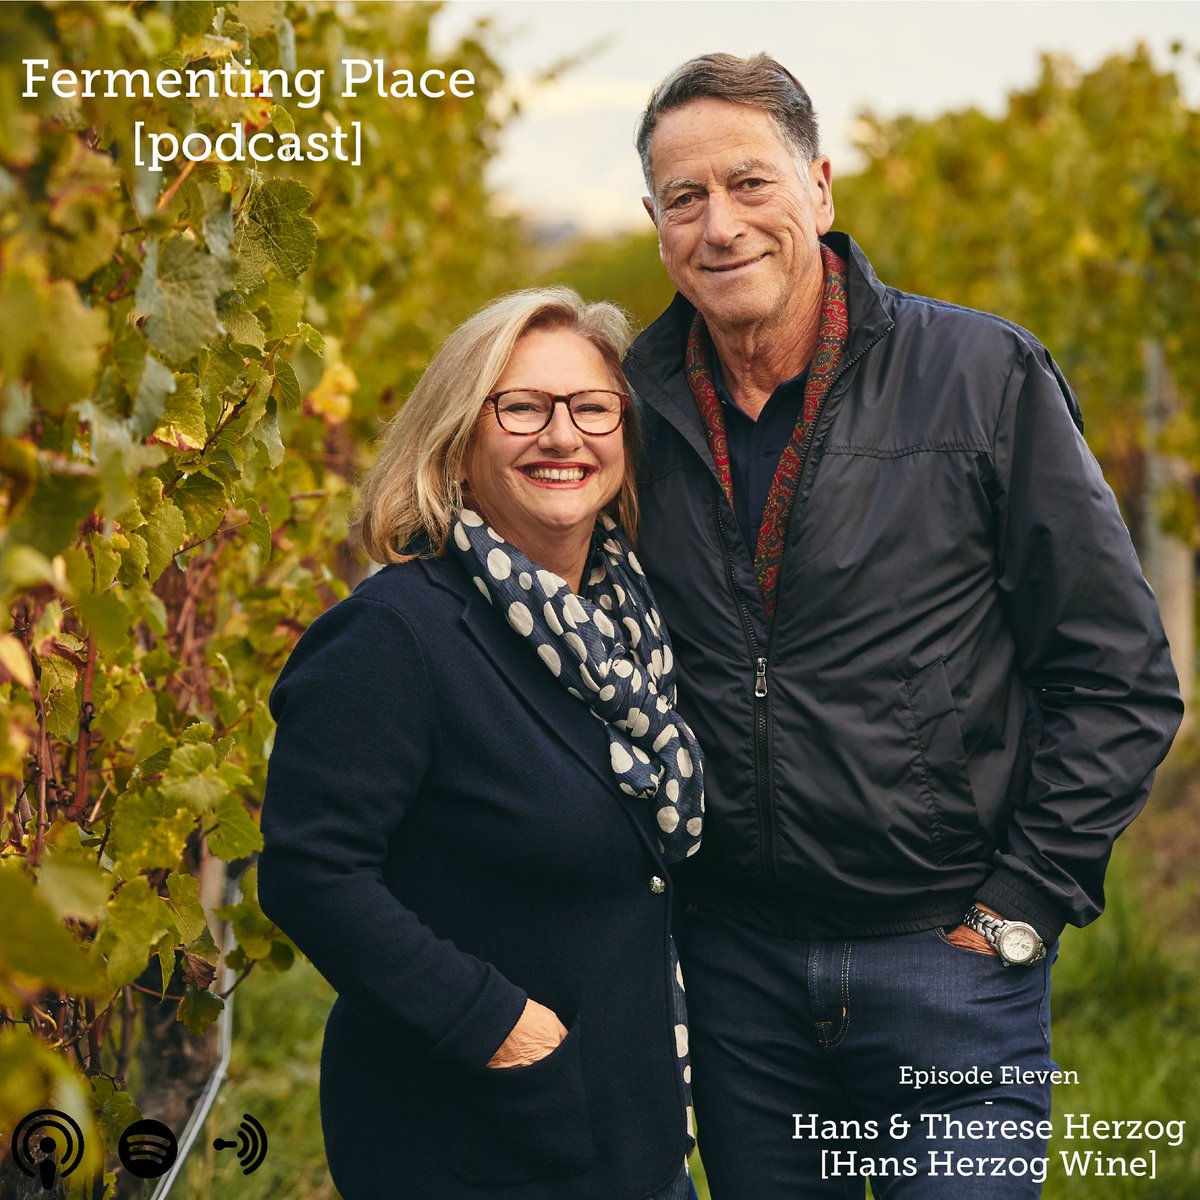 My guests for Episode Eleven of the Fermenting Place [podcast] are Hans and Therese Herzog from Hans Herzogwine from Marlborough, New Zealand. 
Hans and Therese are the dynamic duo behind one of New Zealand's most revered wine labels...